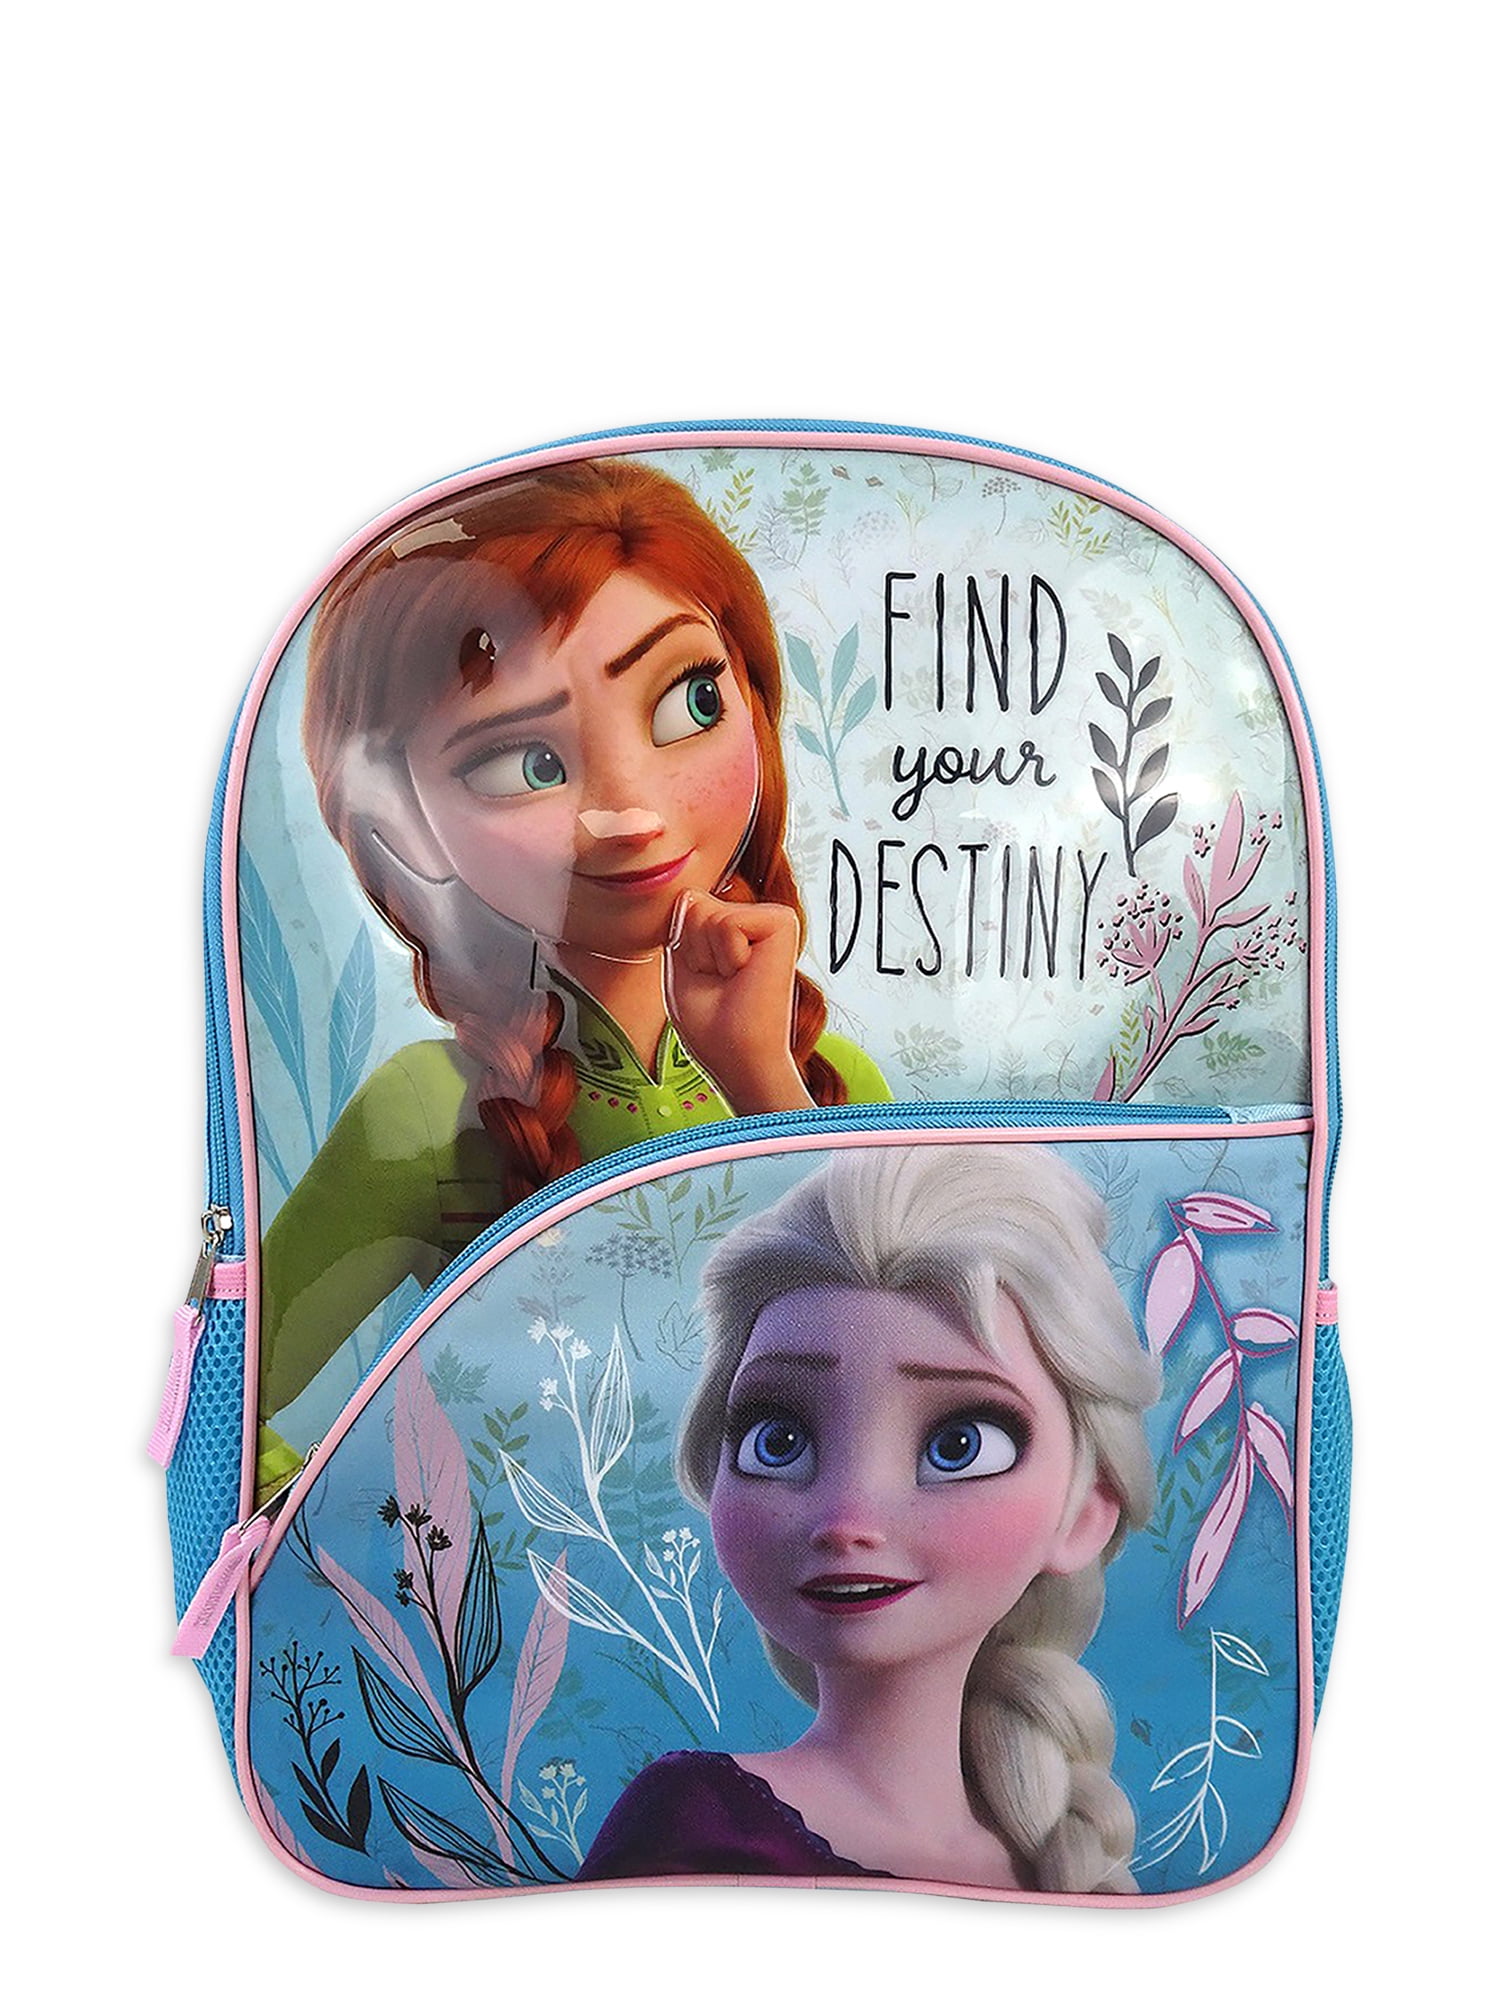 16 Inch Personalized Licensed Disneys Frozen 2 Character Backpack